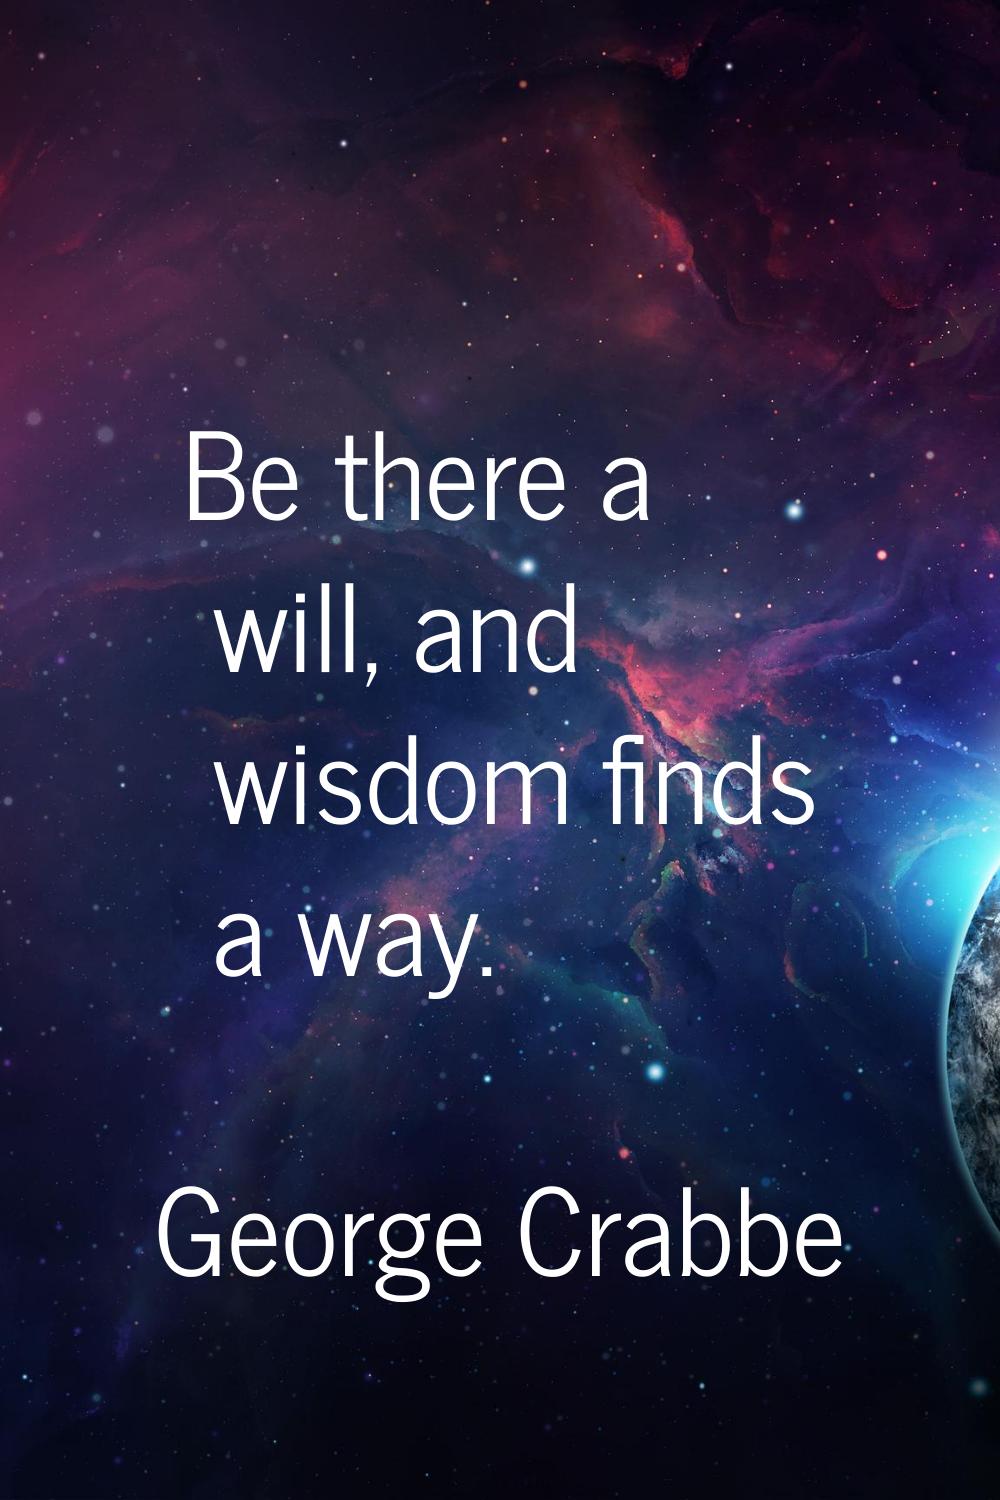 Be there a will, and wisdom finds a way.